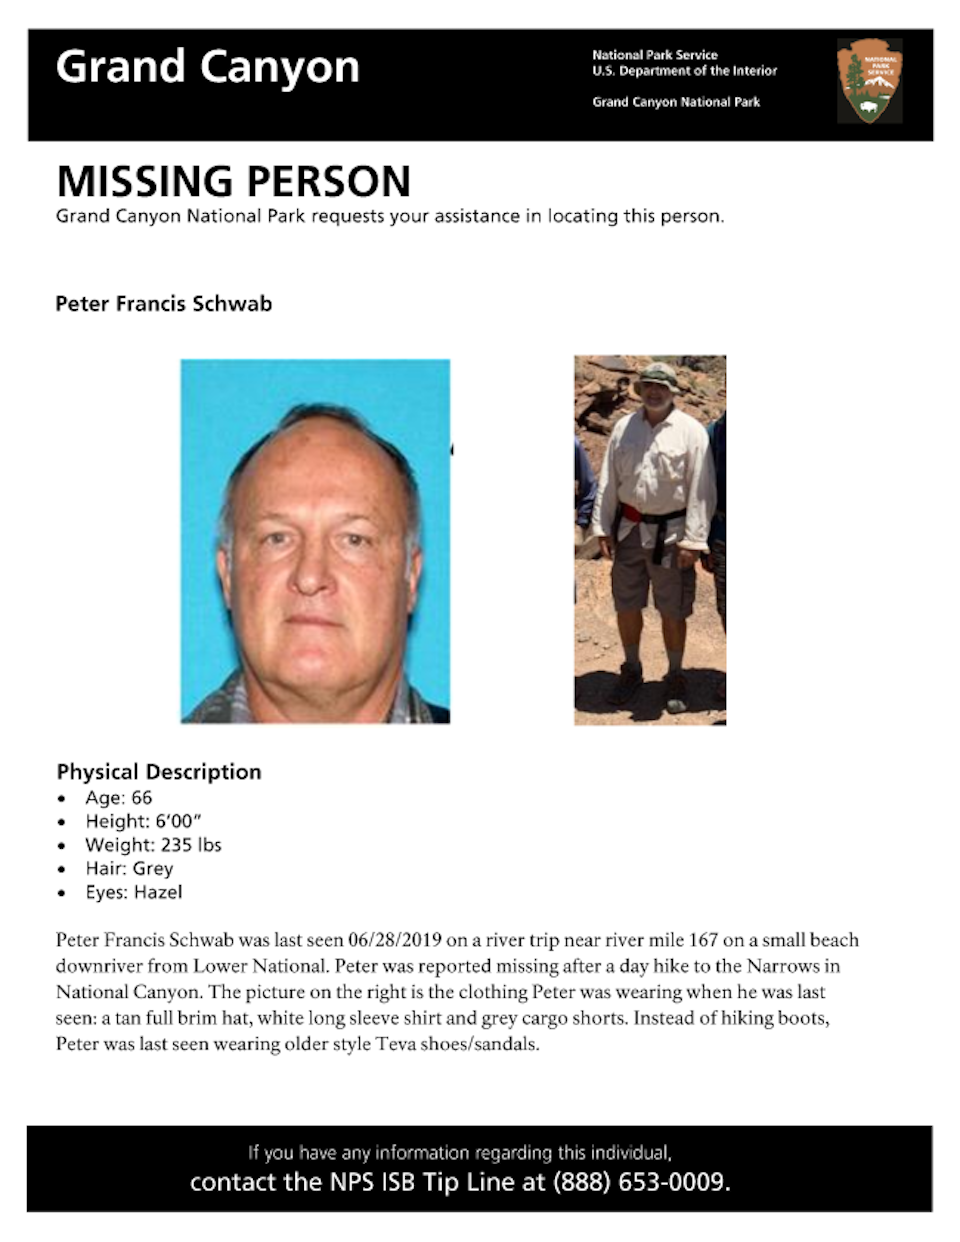 Search underway for missing California man at Grand Canyon National Park/NPS